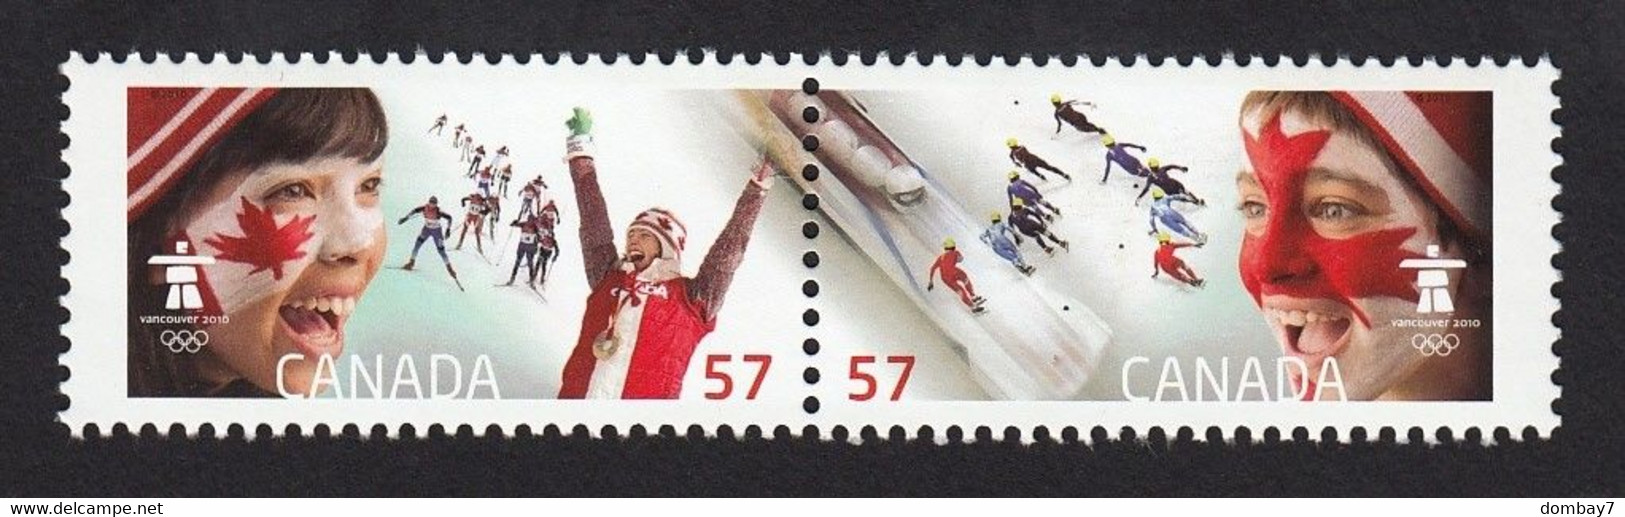 Qt. VANCOUVER OLYMPIC WINTER GAMES = CROSS-COUNTRY SKIING, BOBSLEIGH = Pair From Souvenir Sheet MNH Canada 2010 #2373a,b - Winter 2010: Vancouver